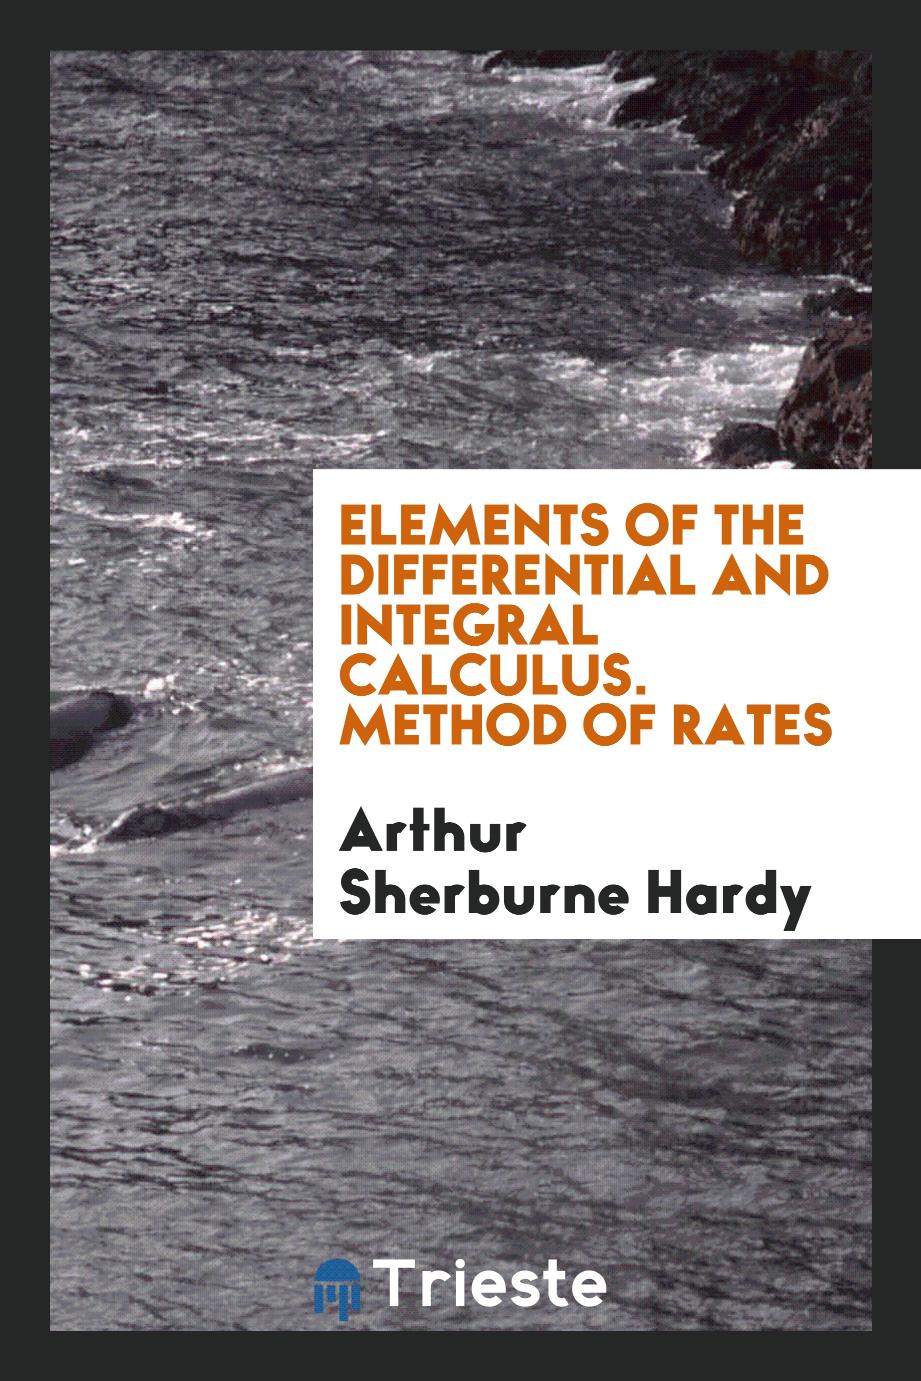 Elements of the differential and integral calculus. Method of rates